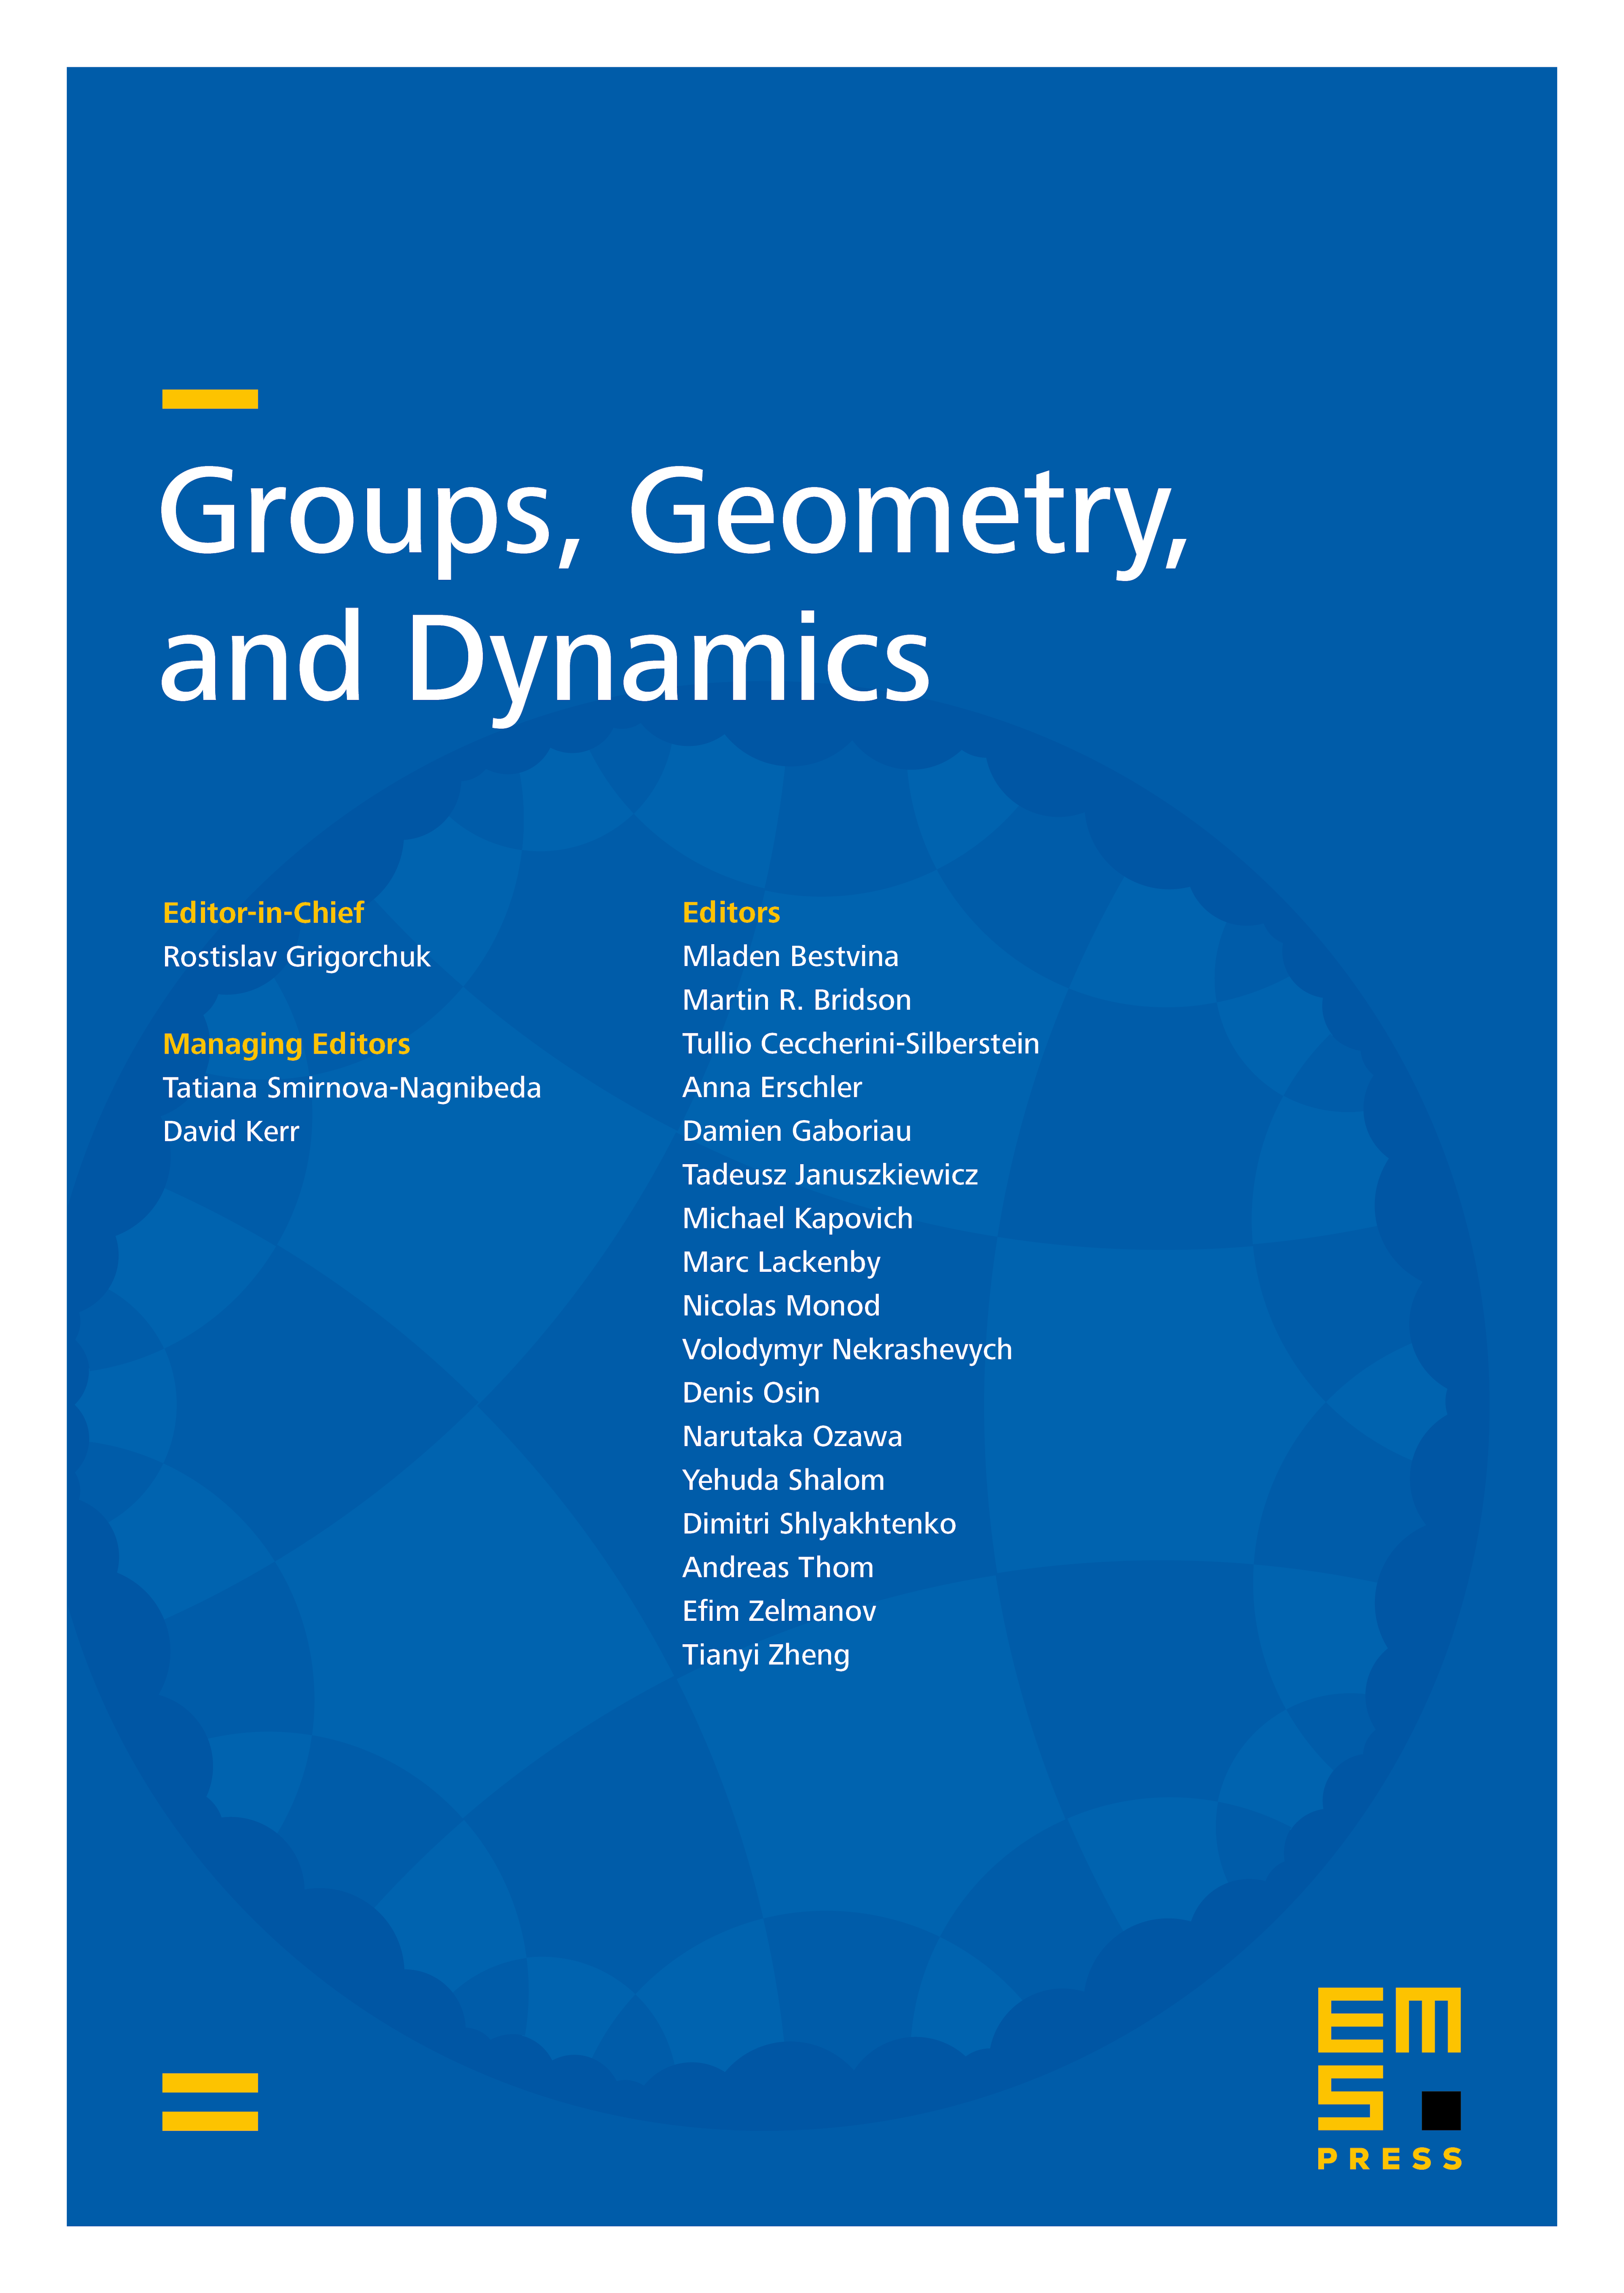 Non-finitely generated relatively hyperbolic groups and Floyd quasiconvexity cover